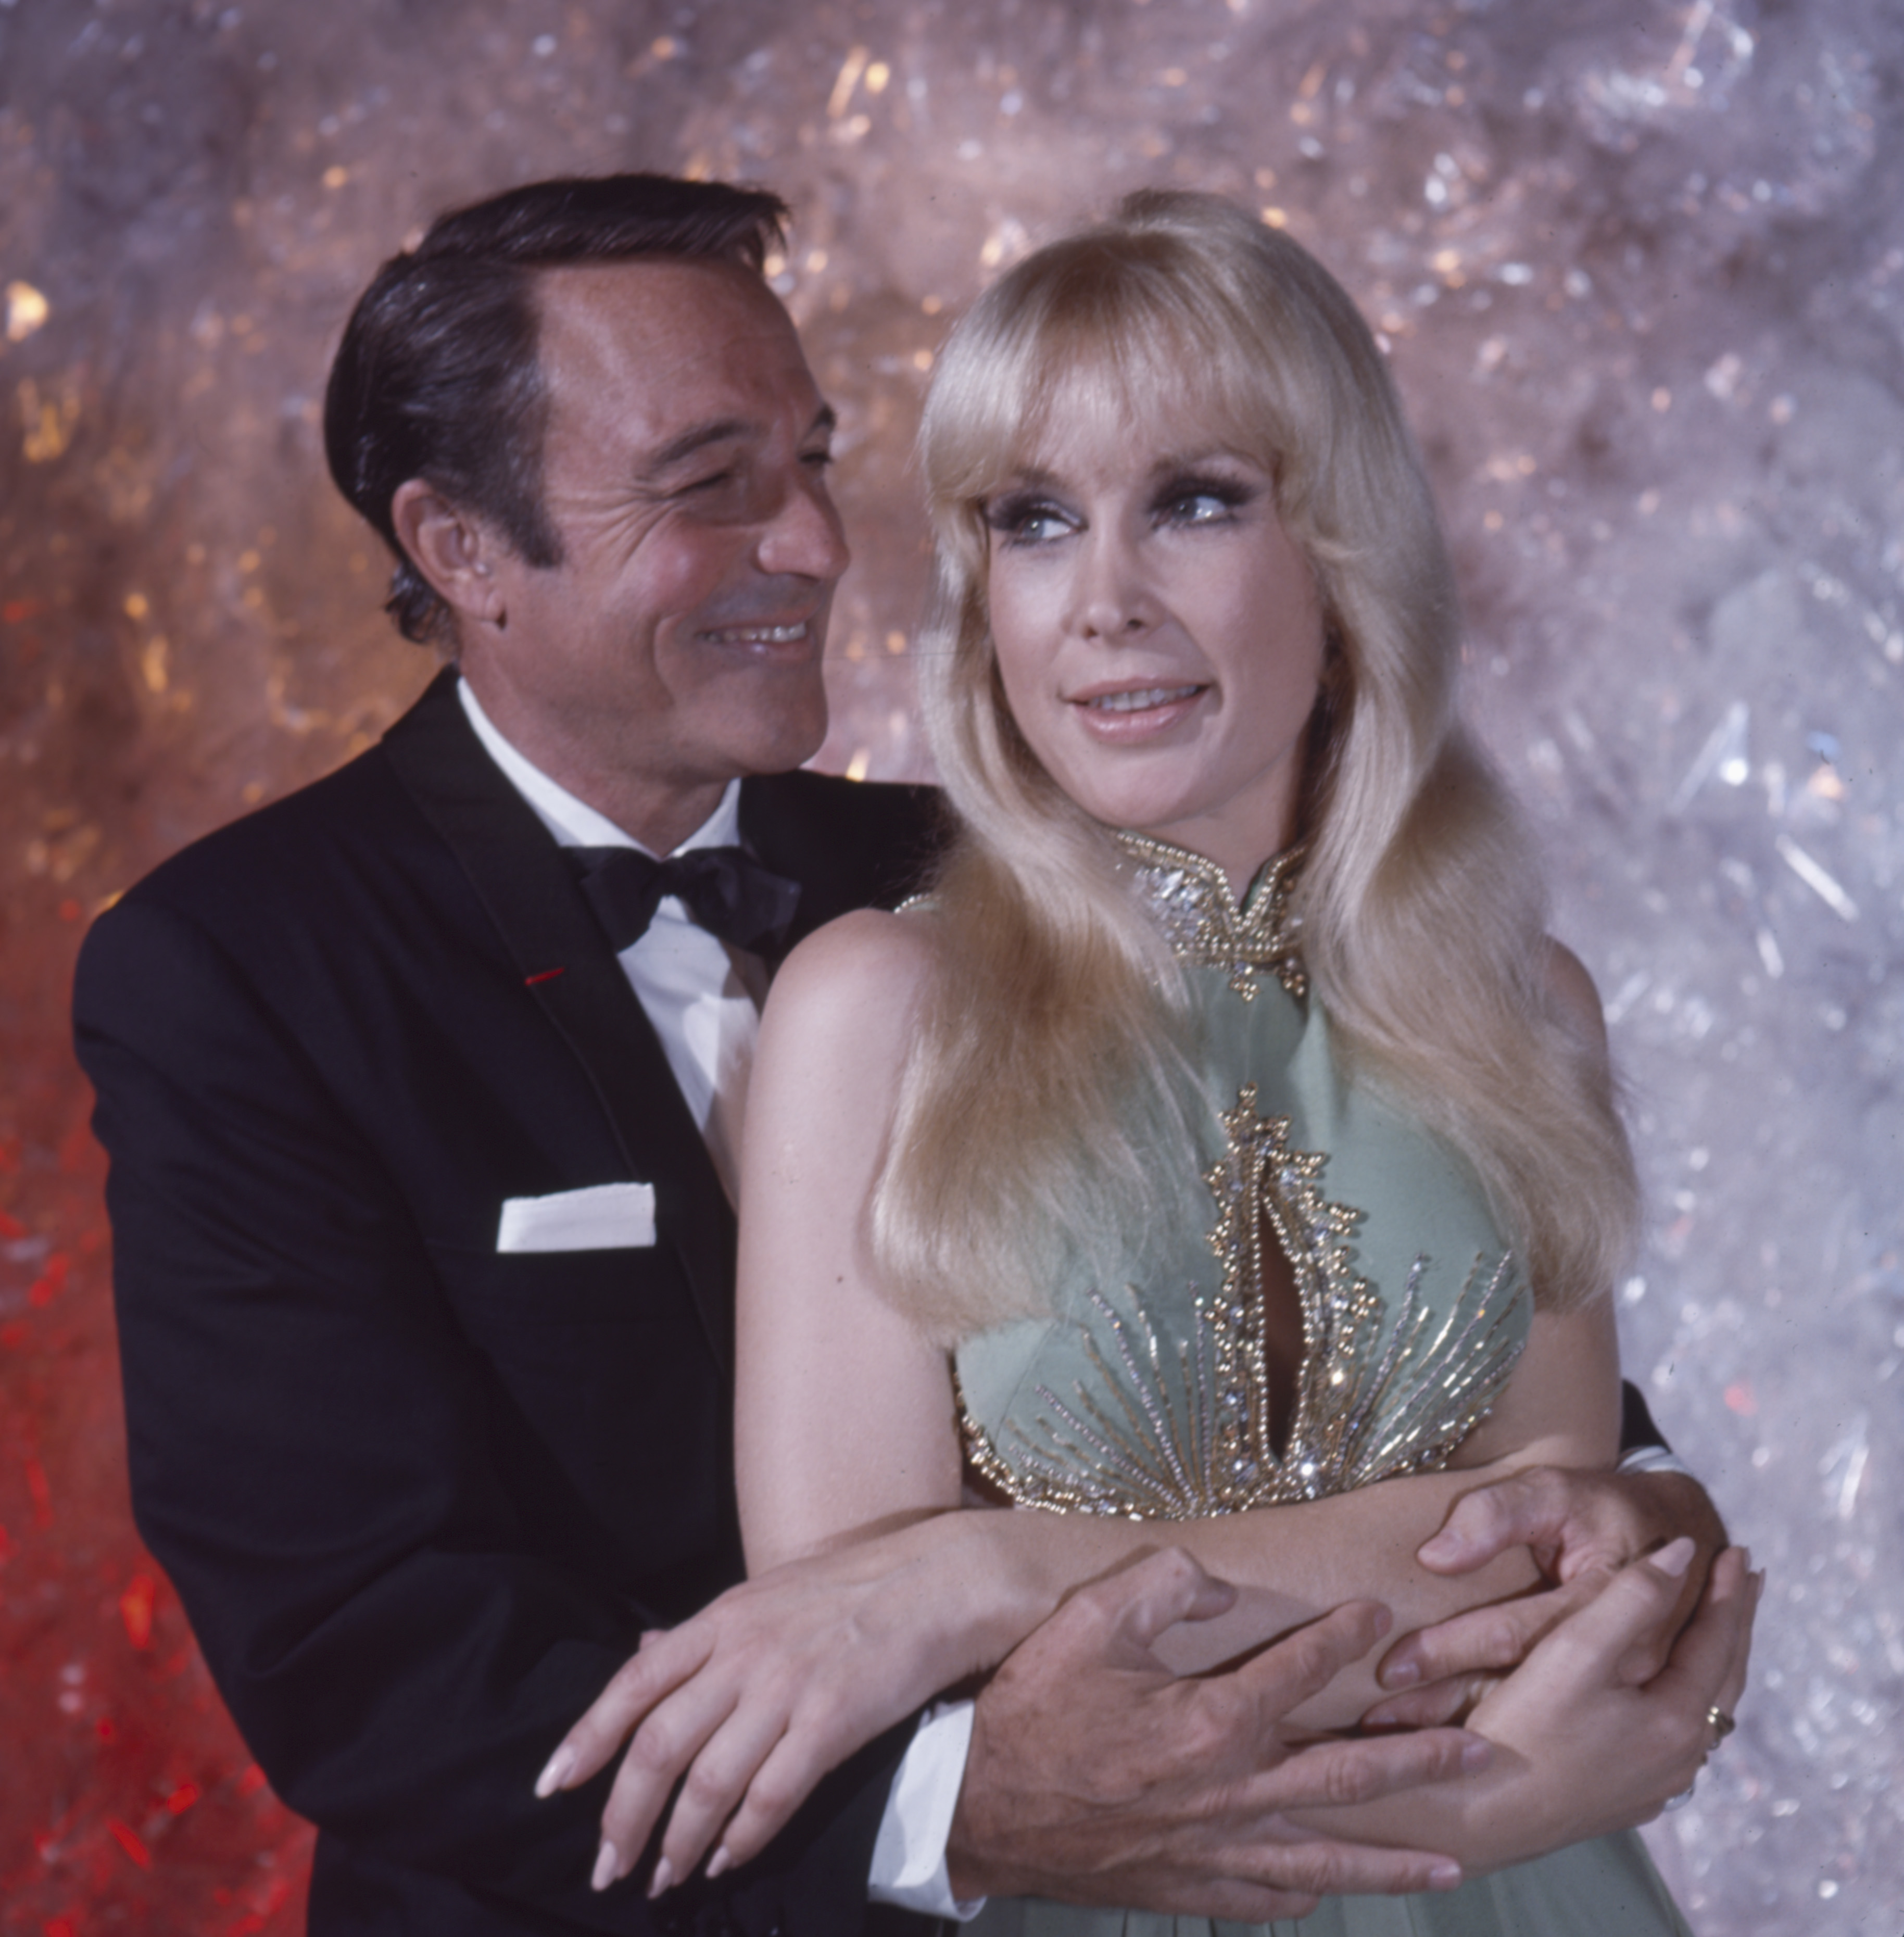 Gene Kelly and Barbara Eden's photo for the TV special "Changing Scene" in 1970. | Source: Getty Images